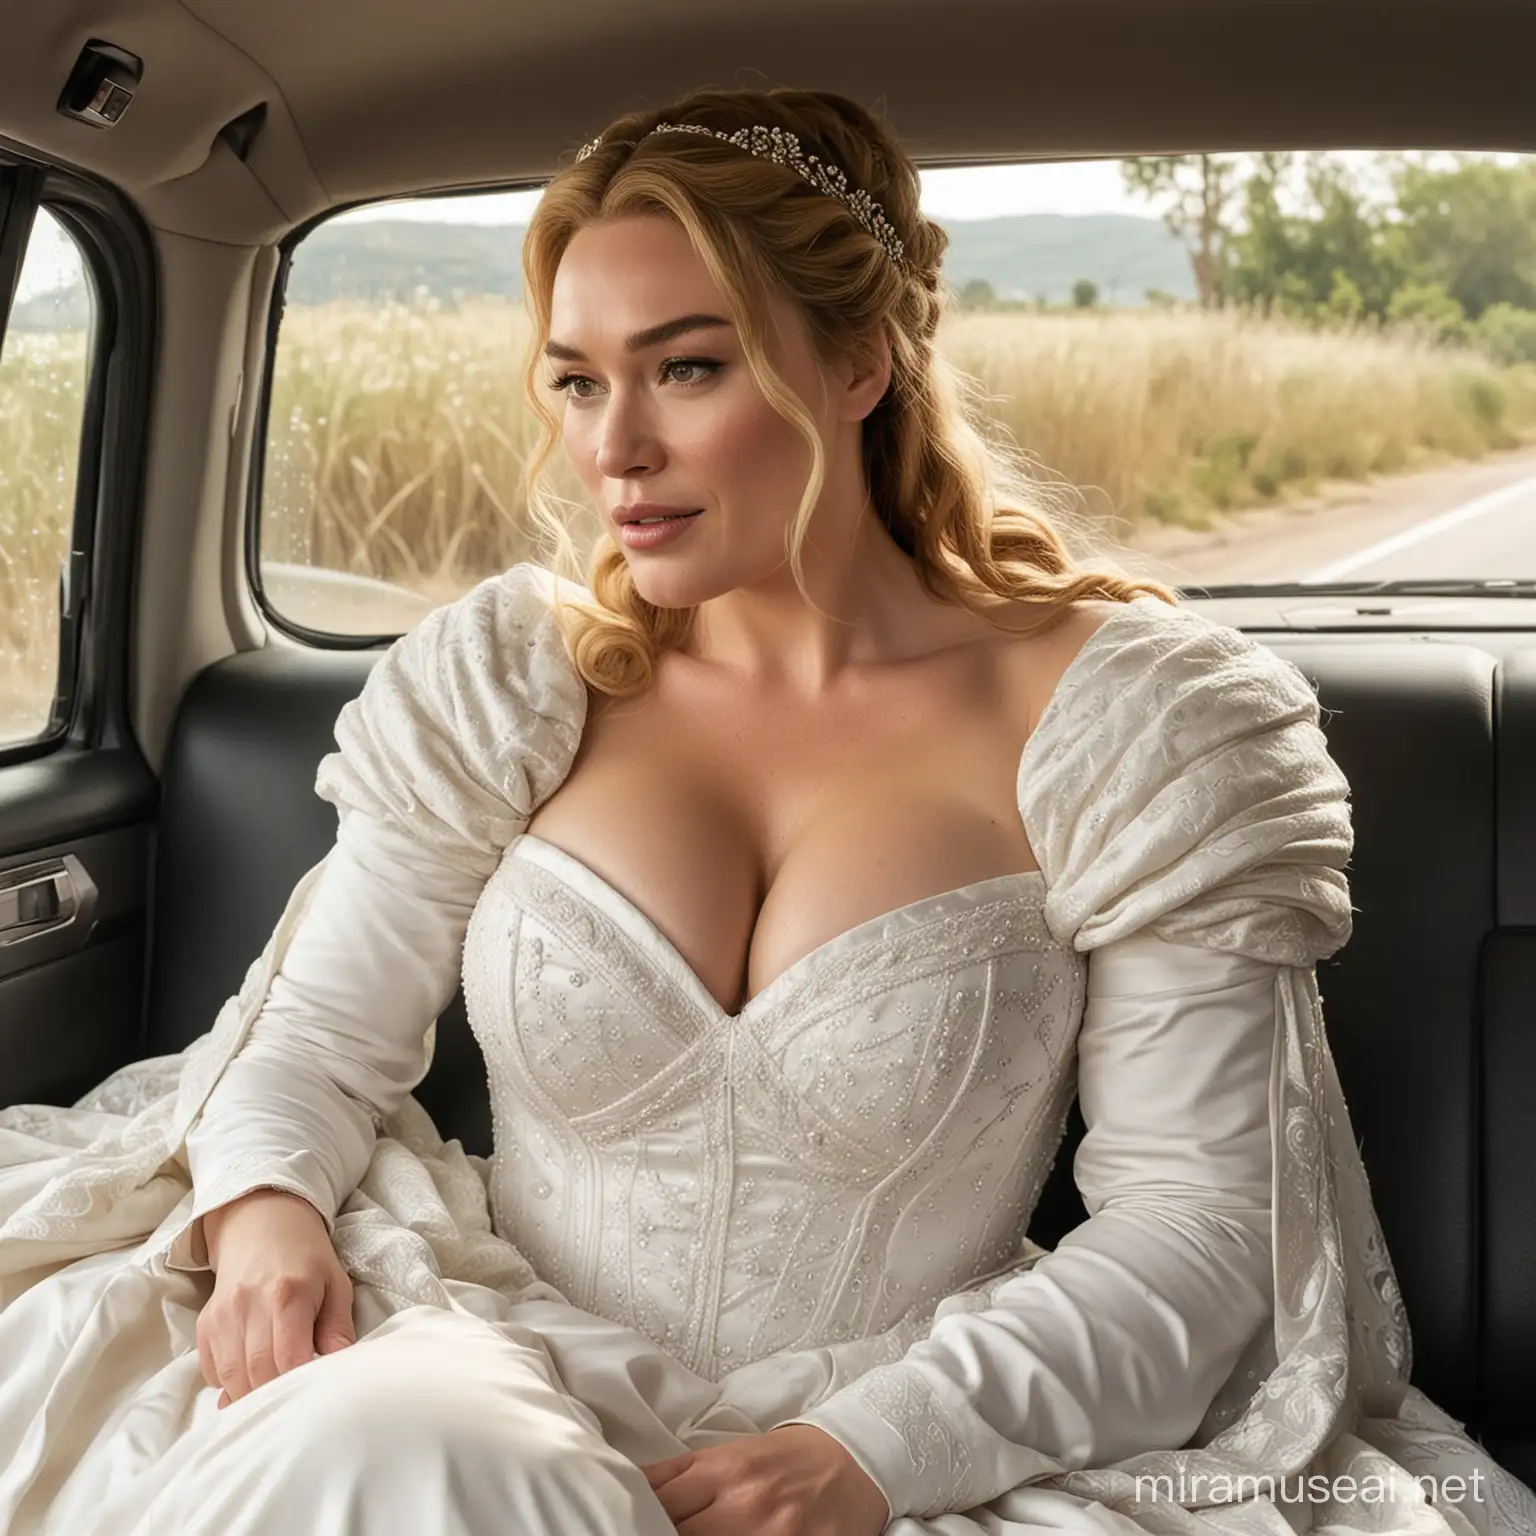 cersei lannister in pigtails, wearing a white wedding dress, in the back seat of a car, bbw, giant breast, massive cleavage